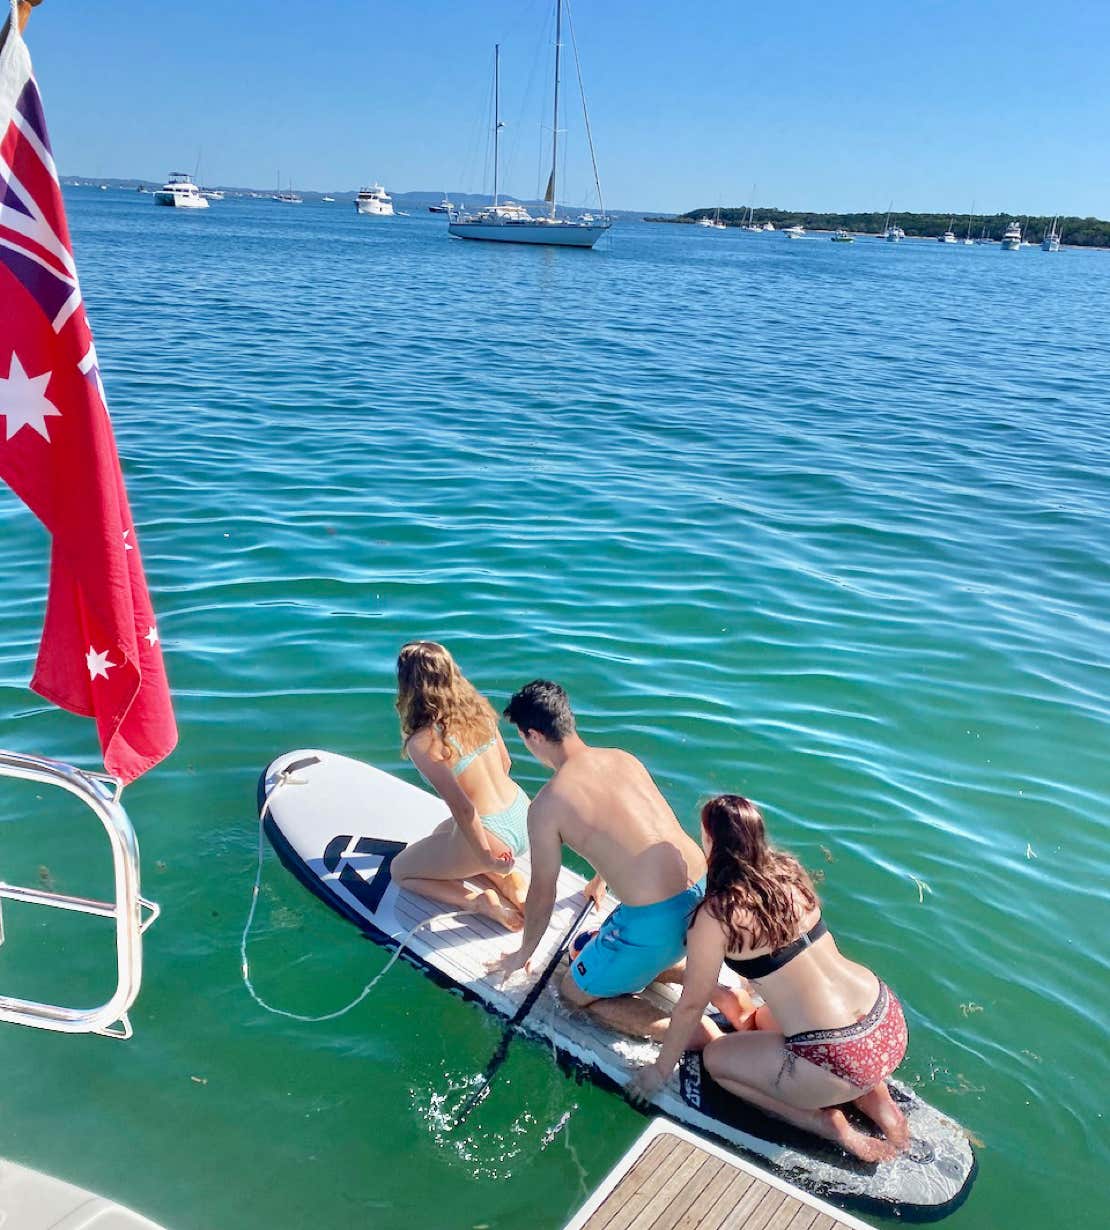 SUP at Horseshoe Bay, Peel Island, Moreton Bay, Brisbane while on a private yacht charter aboard Curew Escape